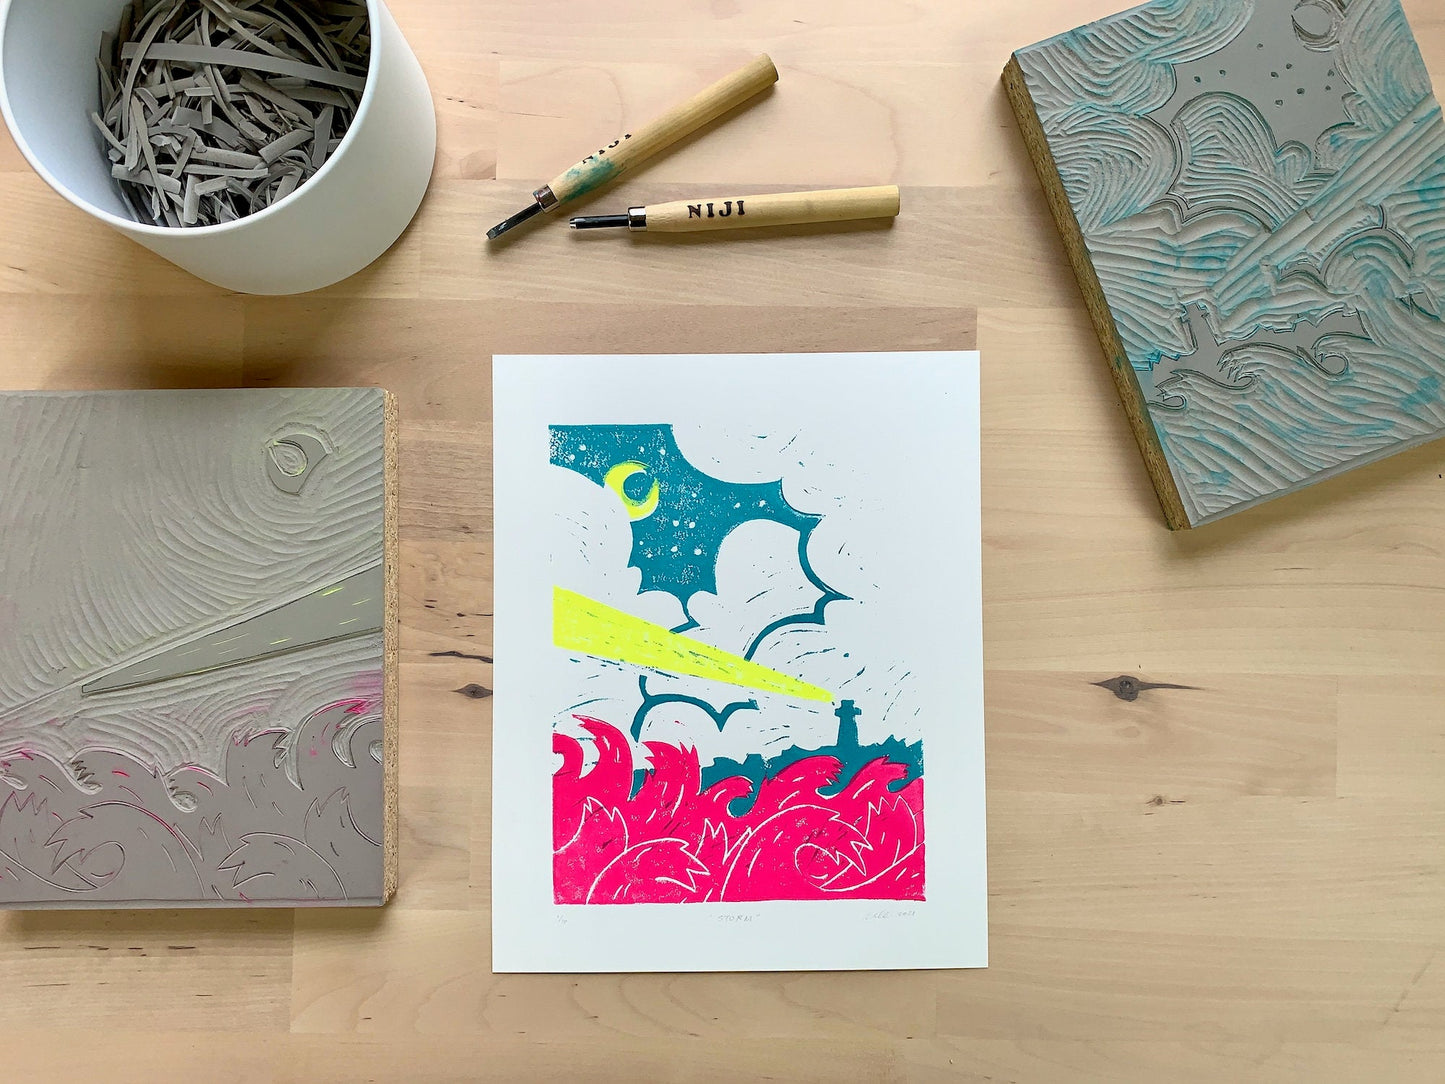 Original linoleum block print artwork showing a lighthouse beam of light in a coastal storm as bright pink waves crash in the foreground.